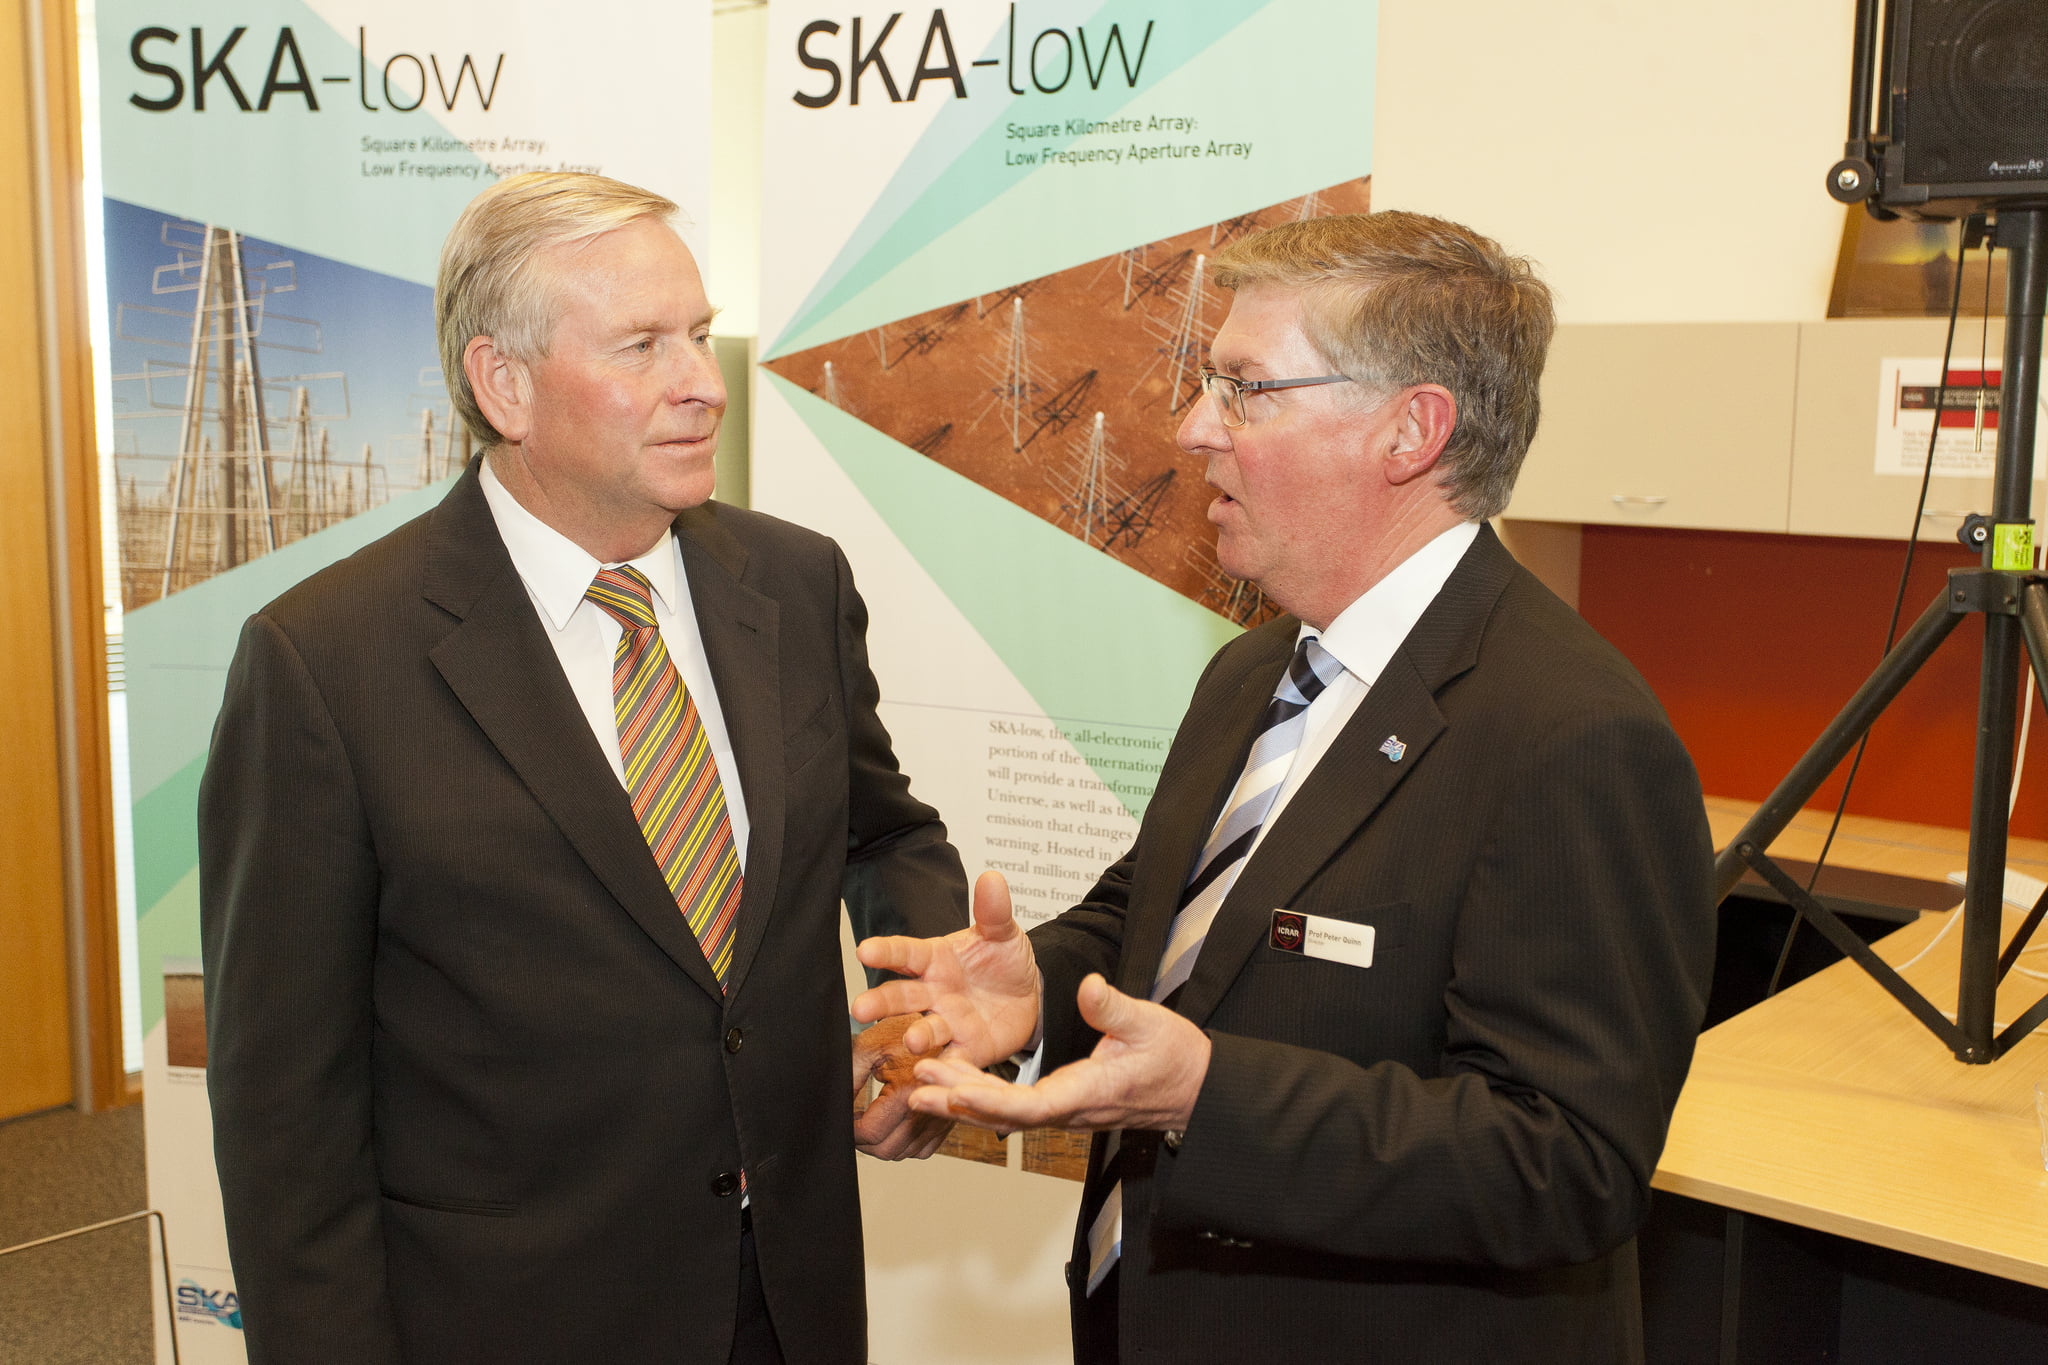  Professor Peter Quinn discusses the Square Kilometre Array radio telescope with WA Premier Colin Barnett after the Premier announced $26 million in State Government funding for the International Centre for Radio Astronomy Research in September this year. 